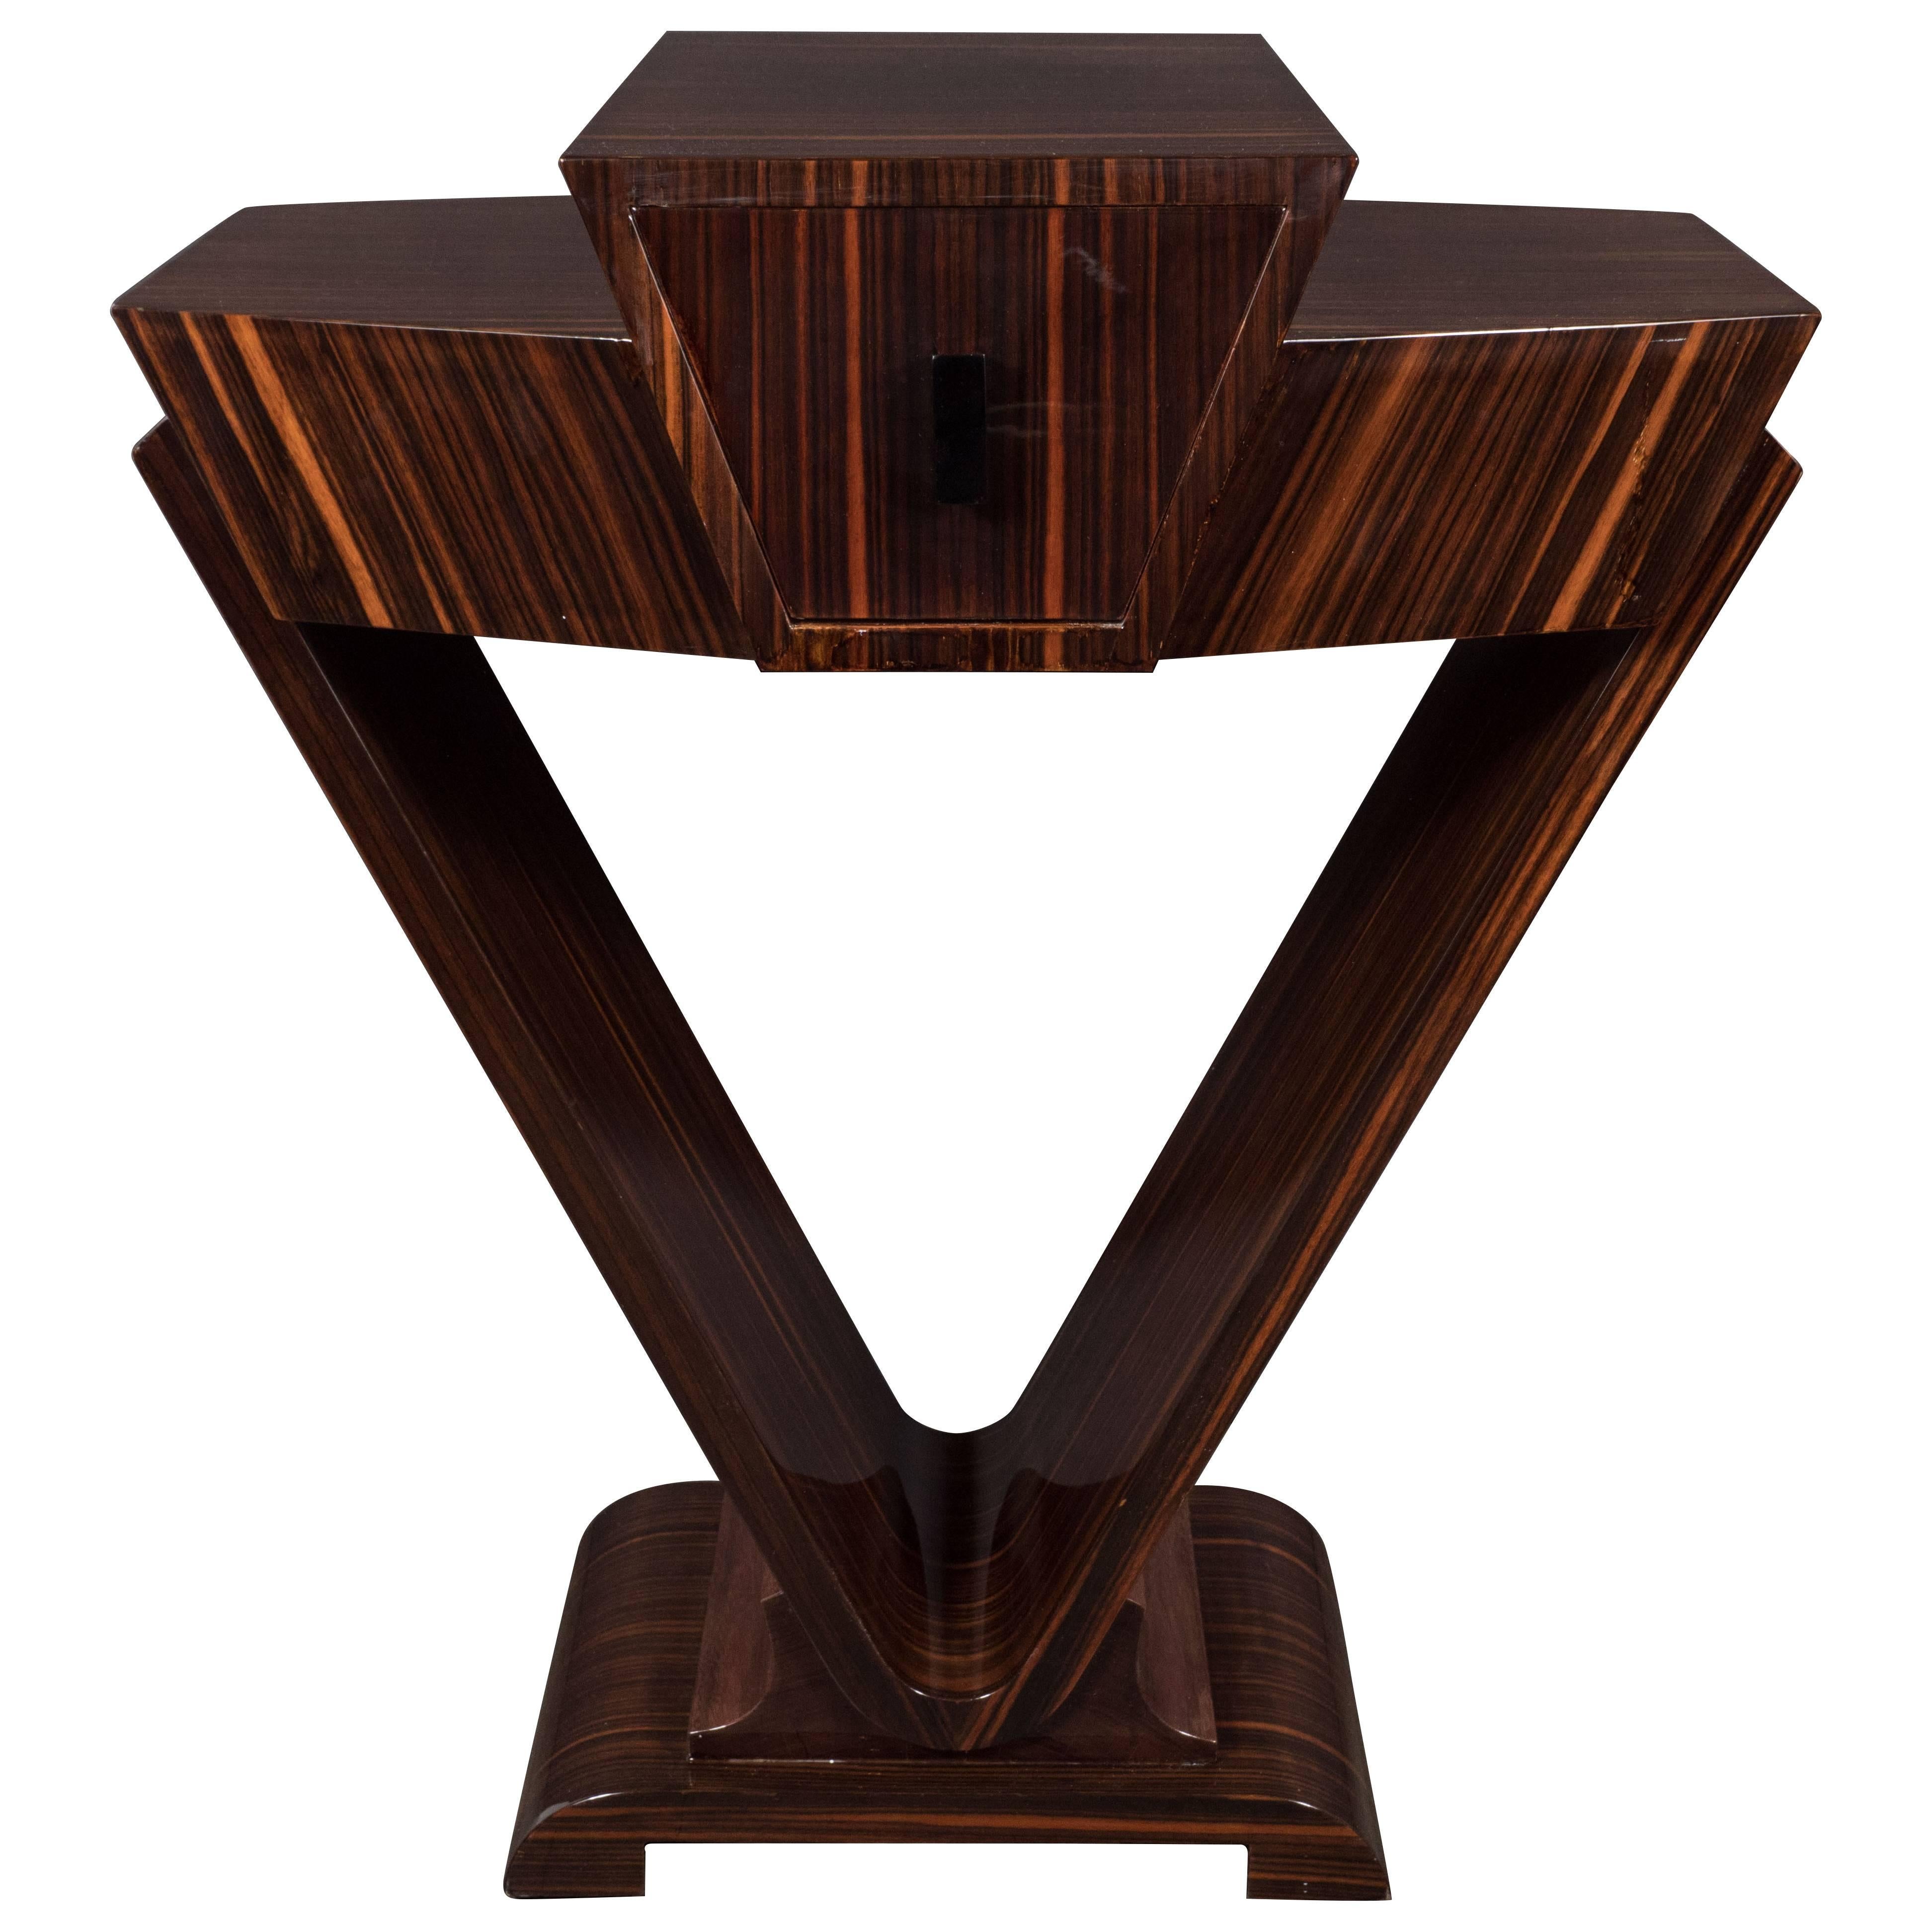  Art Deco Skyscraper Style Console Table in Book-Matched Macassar